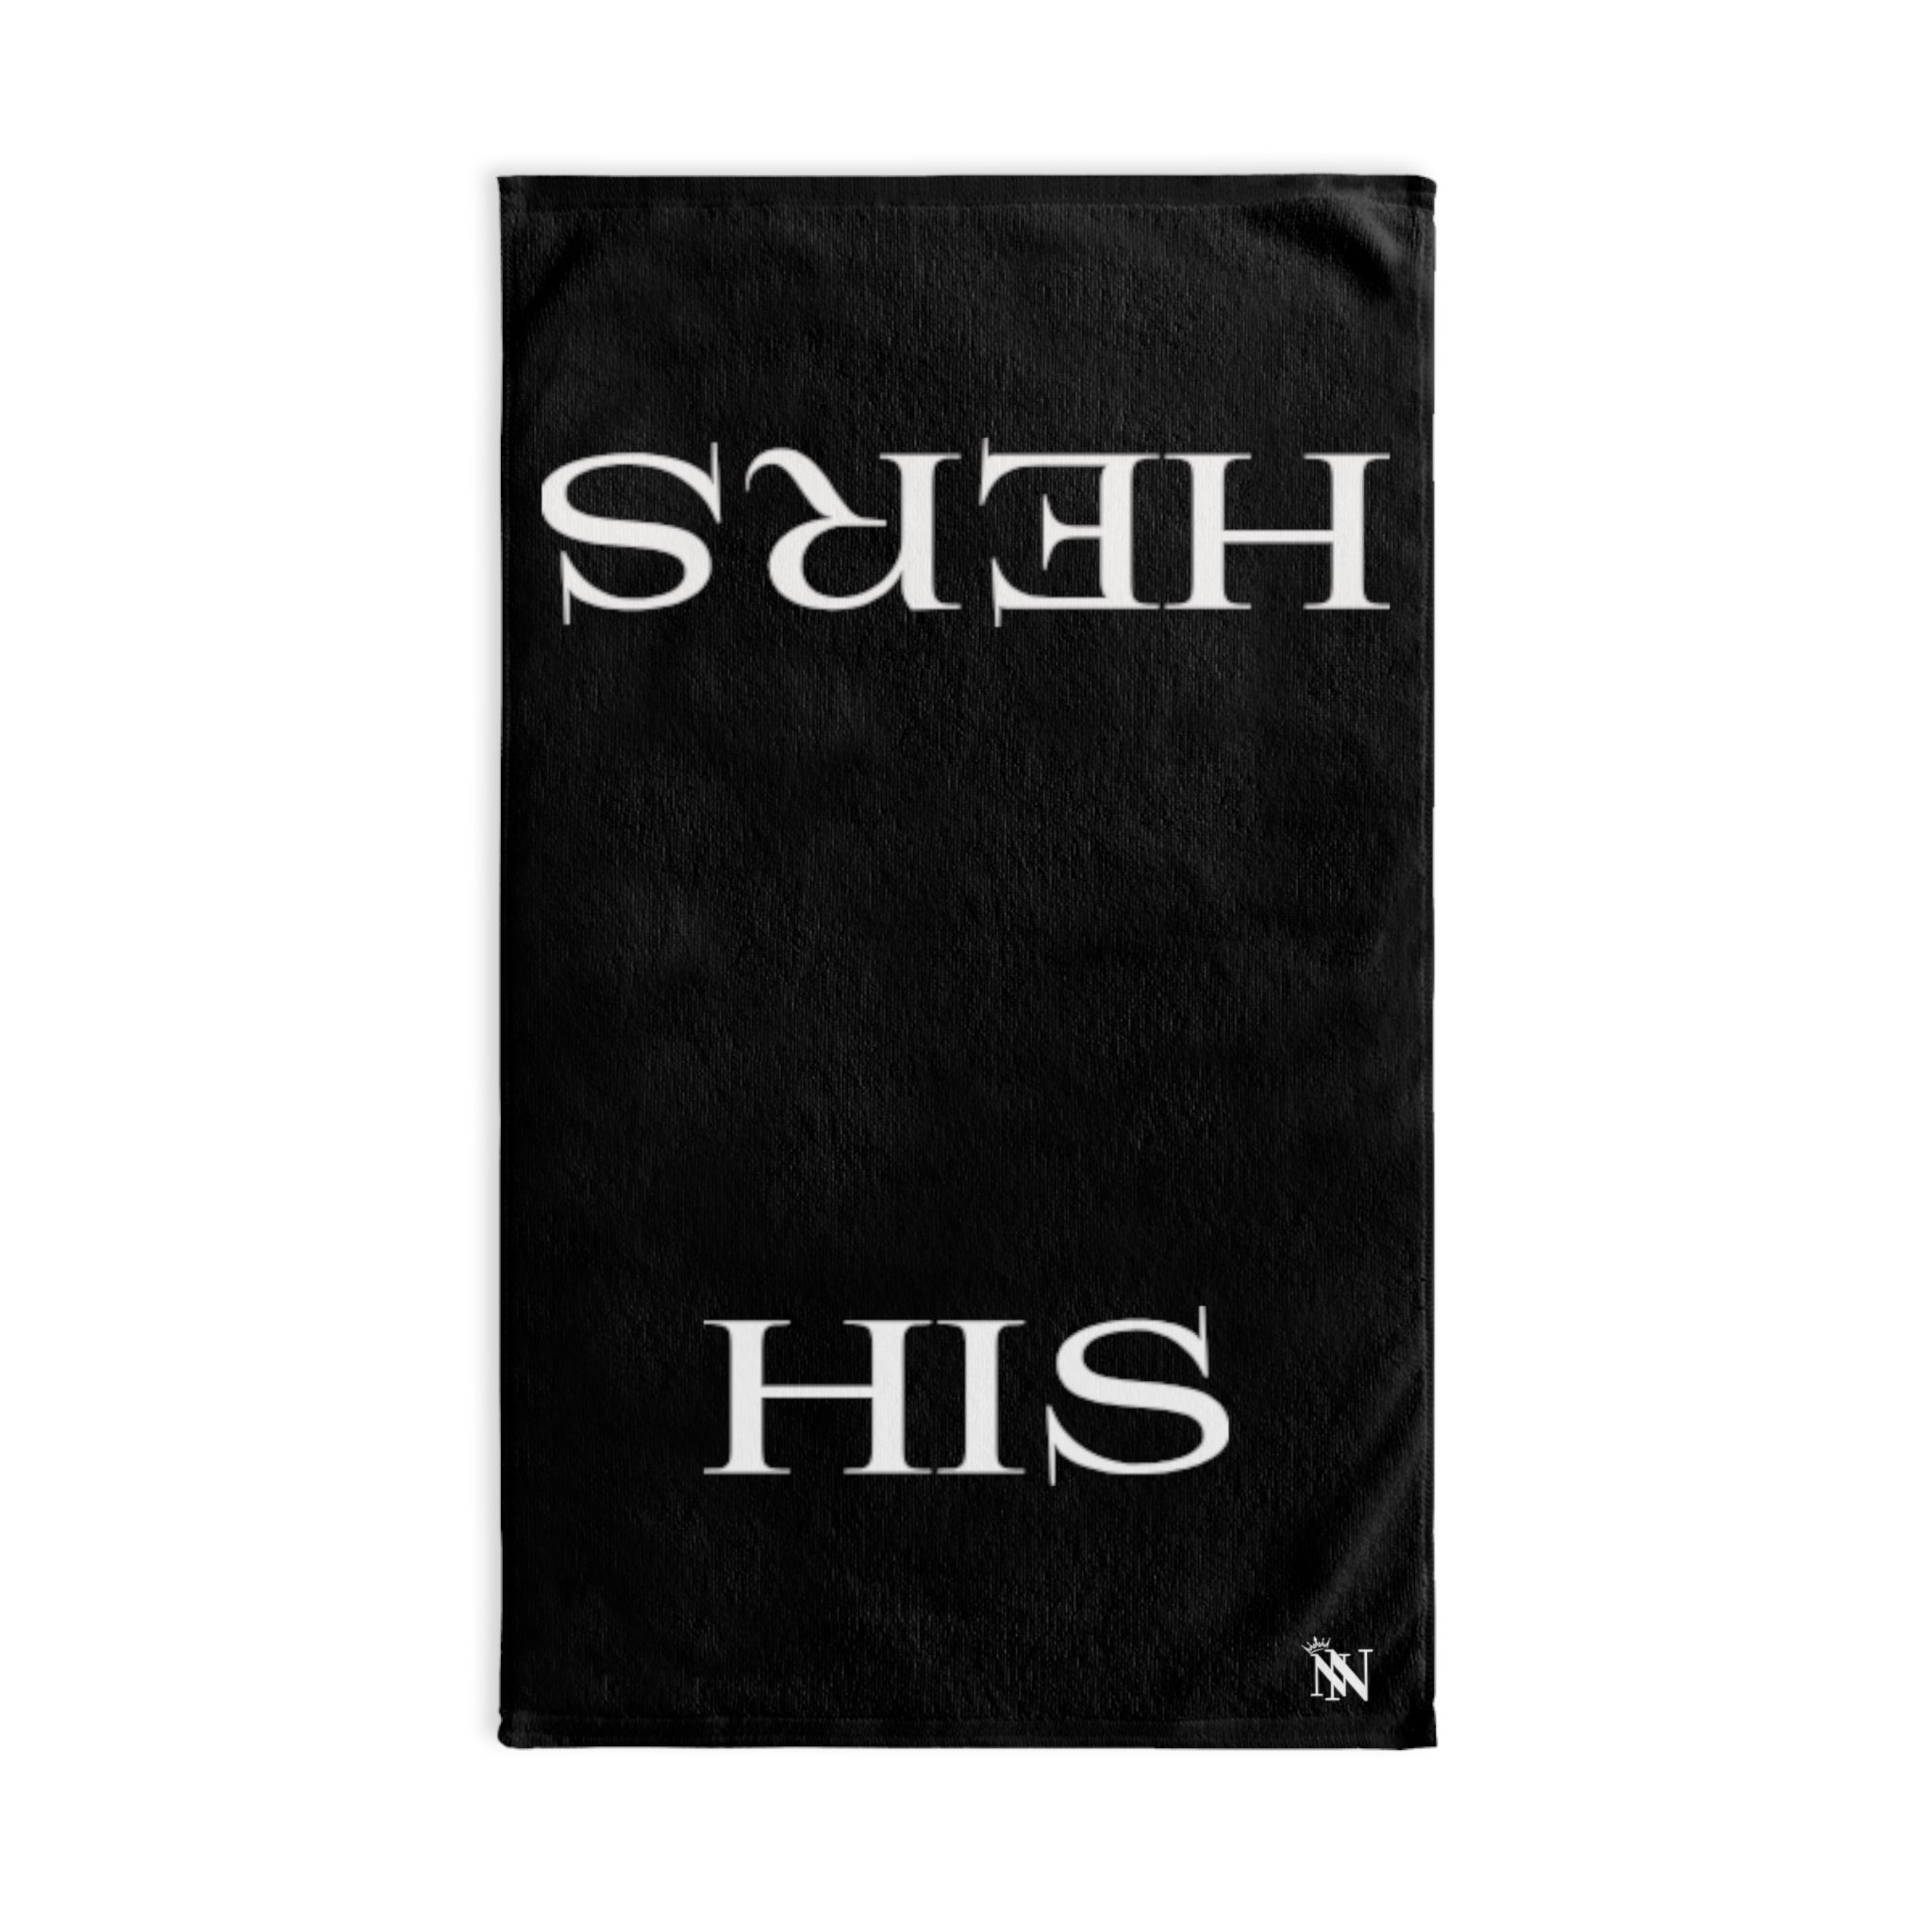 His Hers Black | Sexy Gifts for Boyfriend, Funny Towel Romantic Gift for Wedding Couple Fiance First Year 2nd Anniversary Valentines, Party Gag Gifts, Joke Humor Cloth for Husband Men BF NECTAR NAPKINS